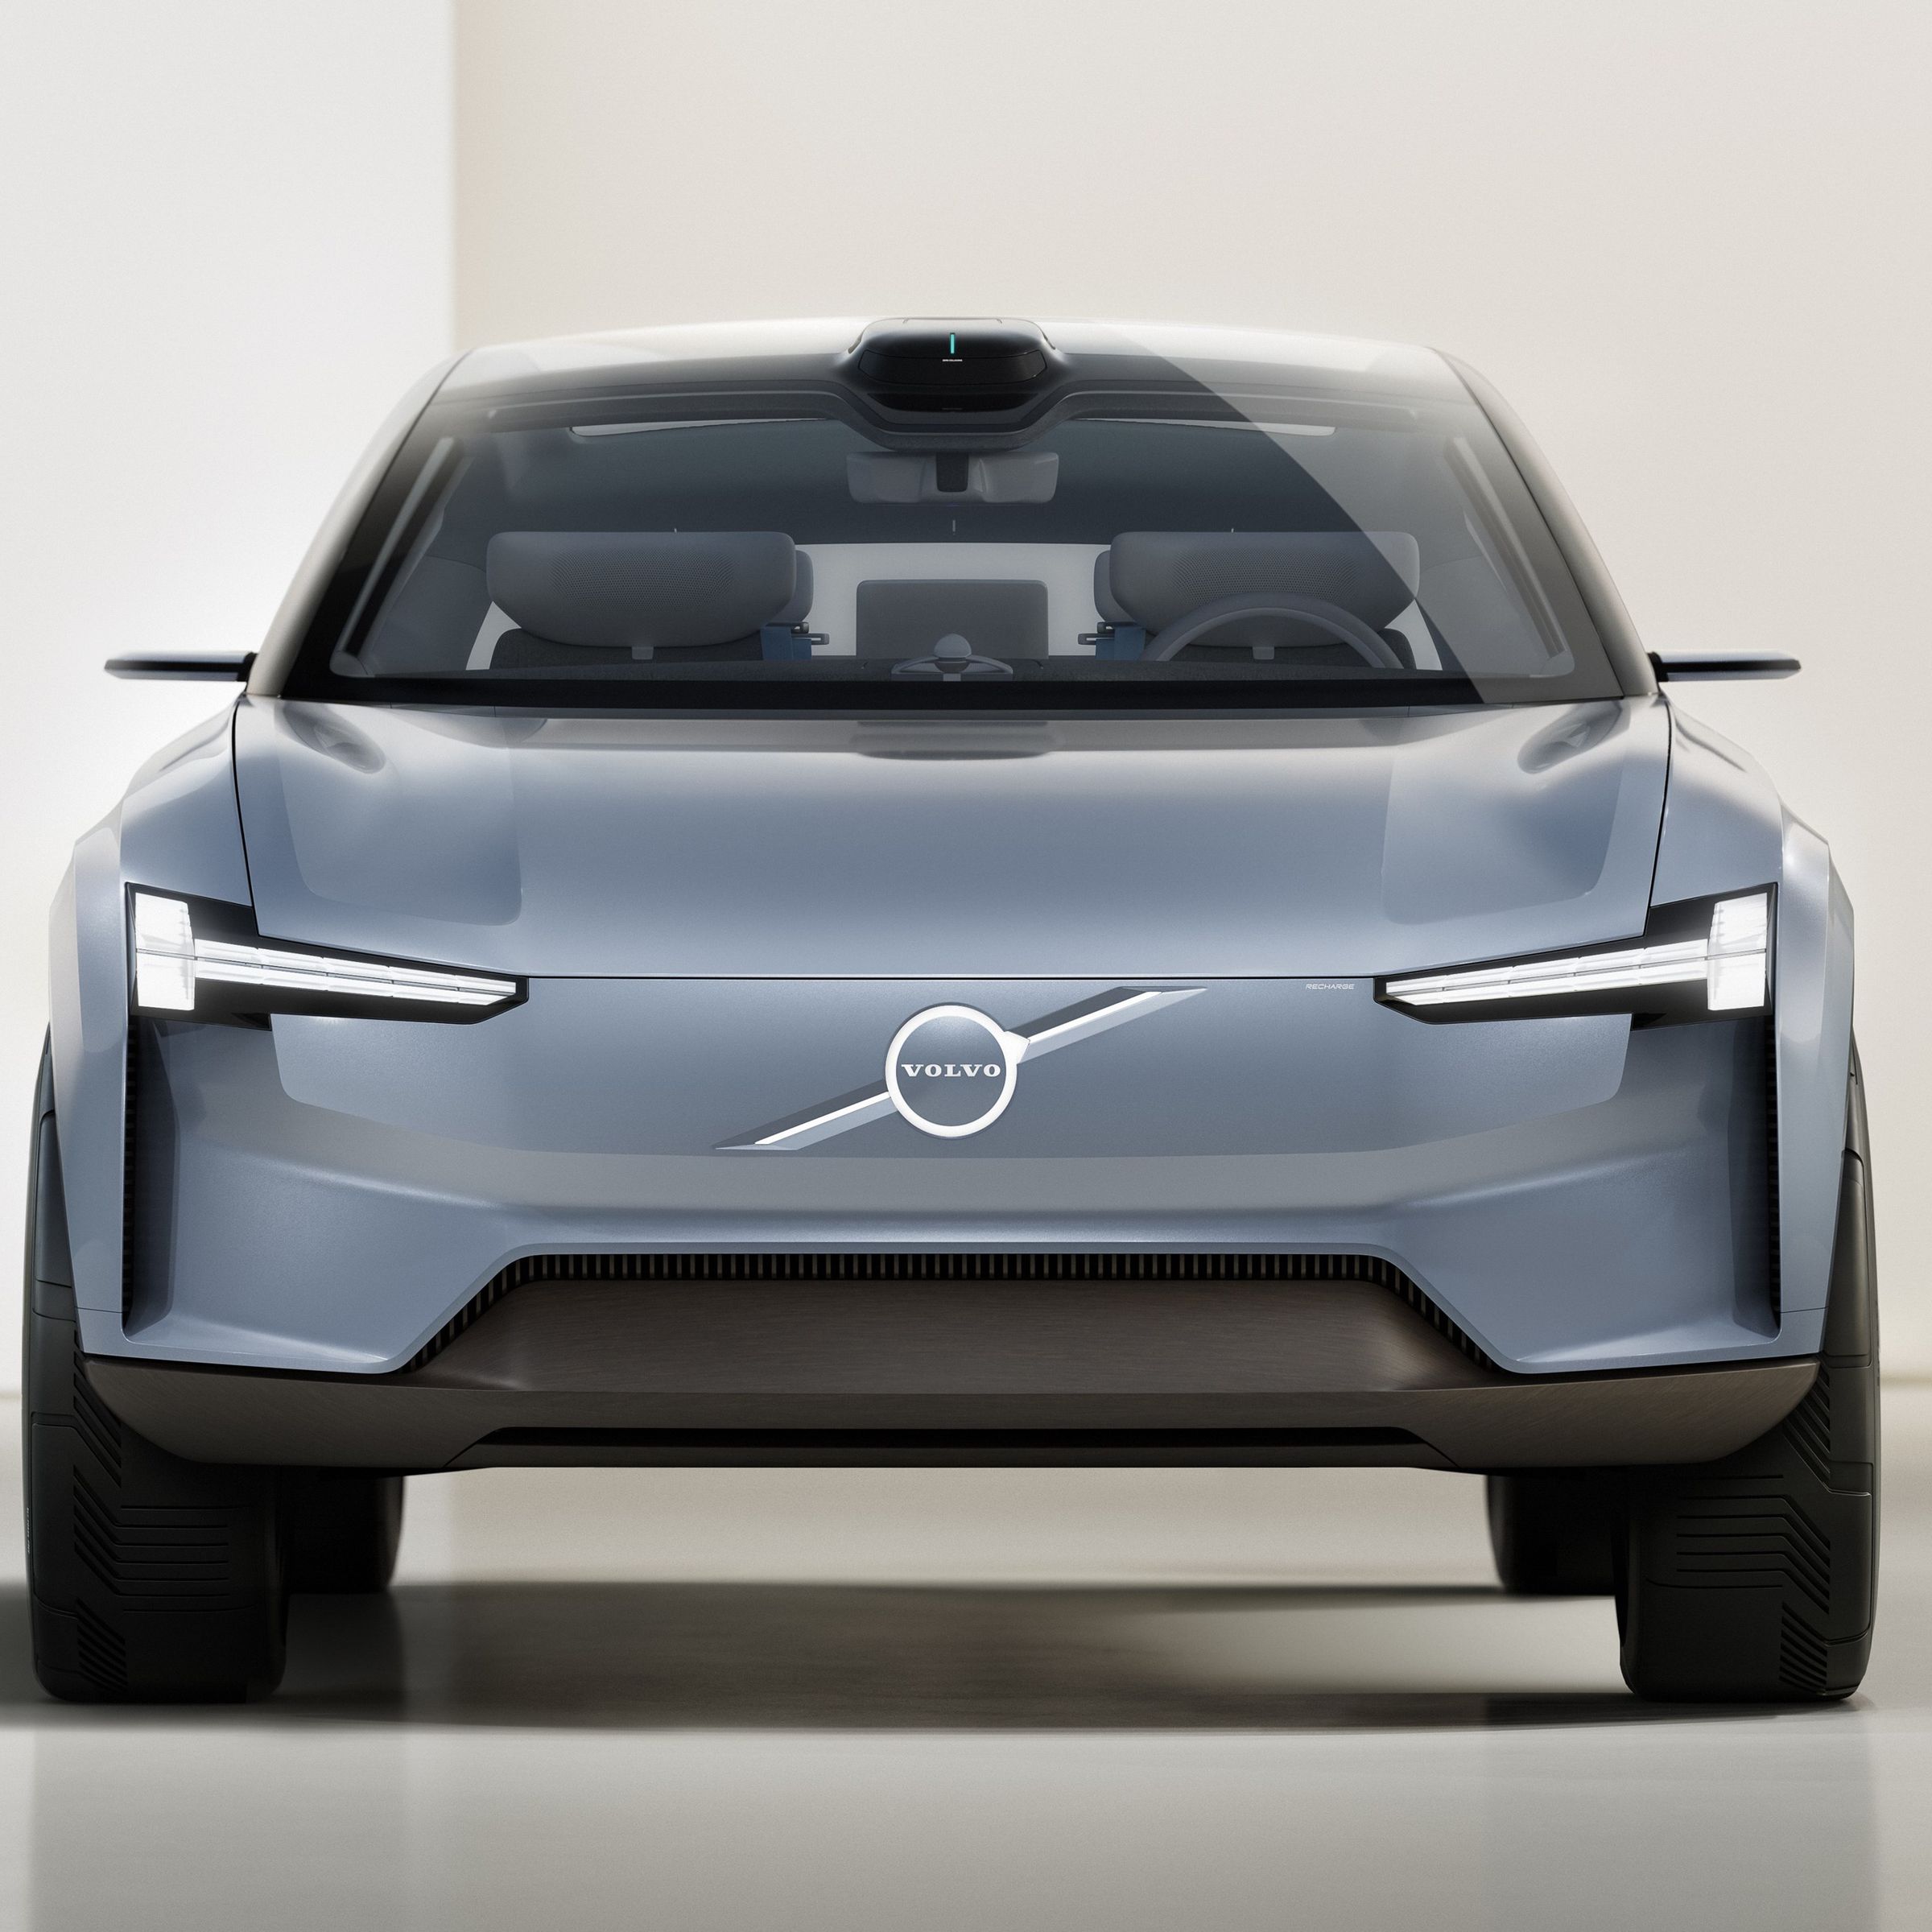 Volvo’s Concept Recharge is a rendering of a gray electric vehicle with the Volvo badge.